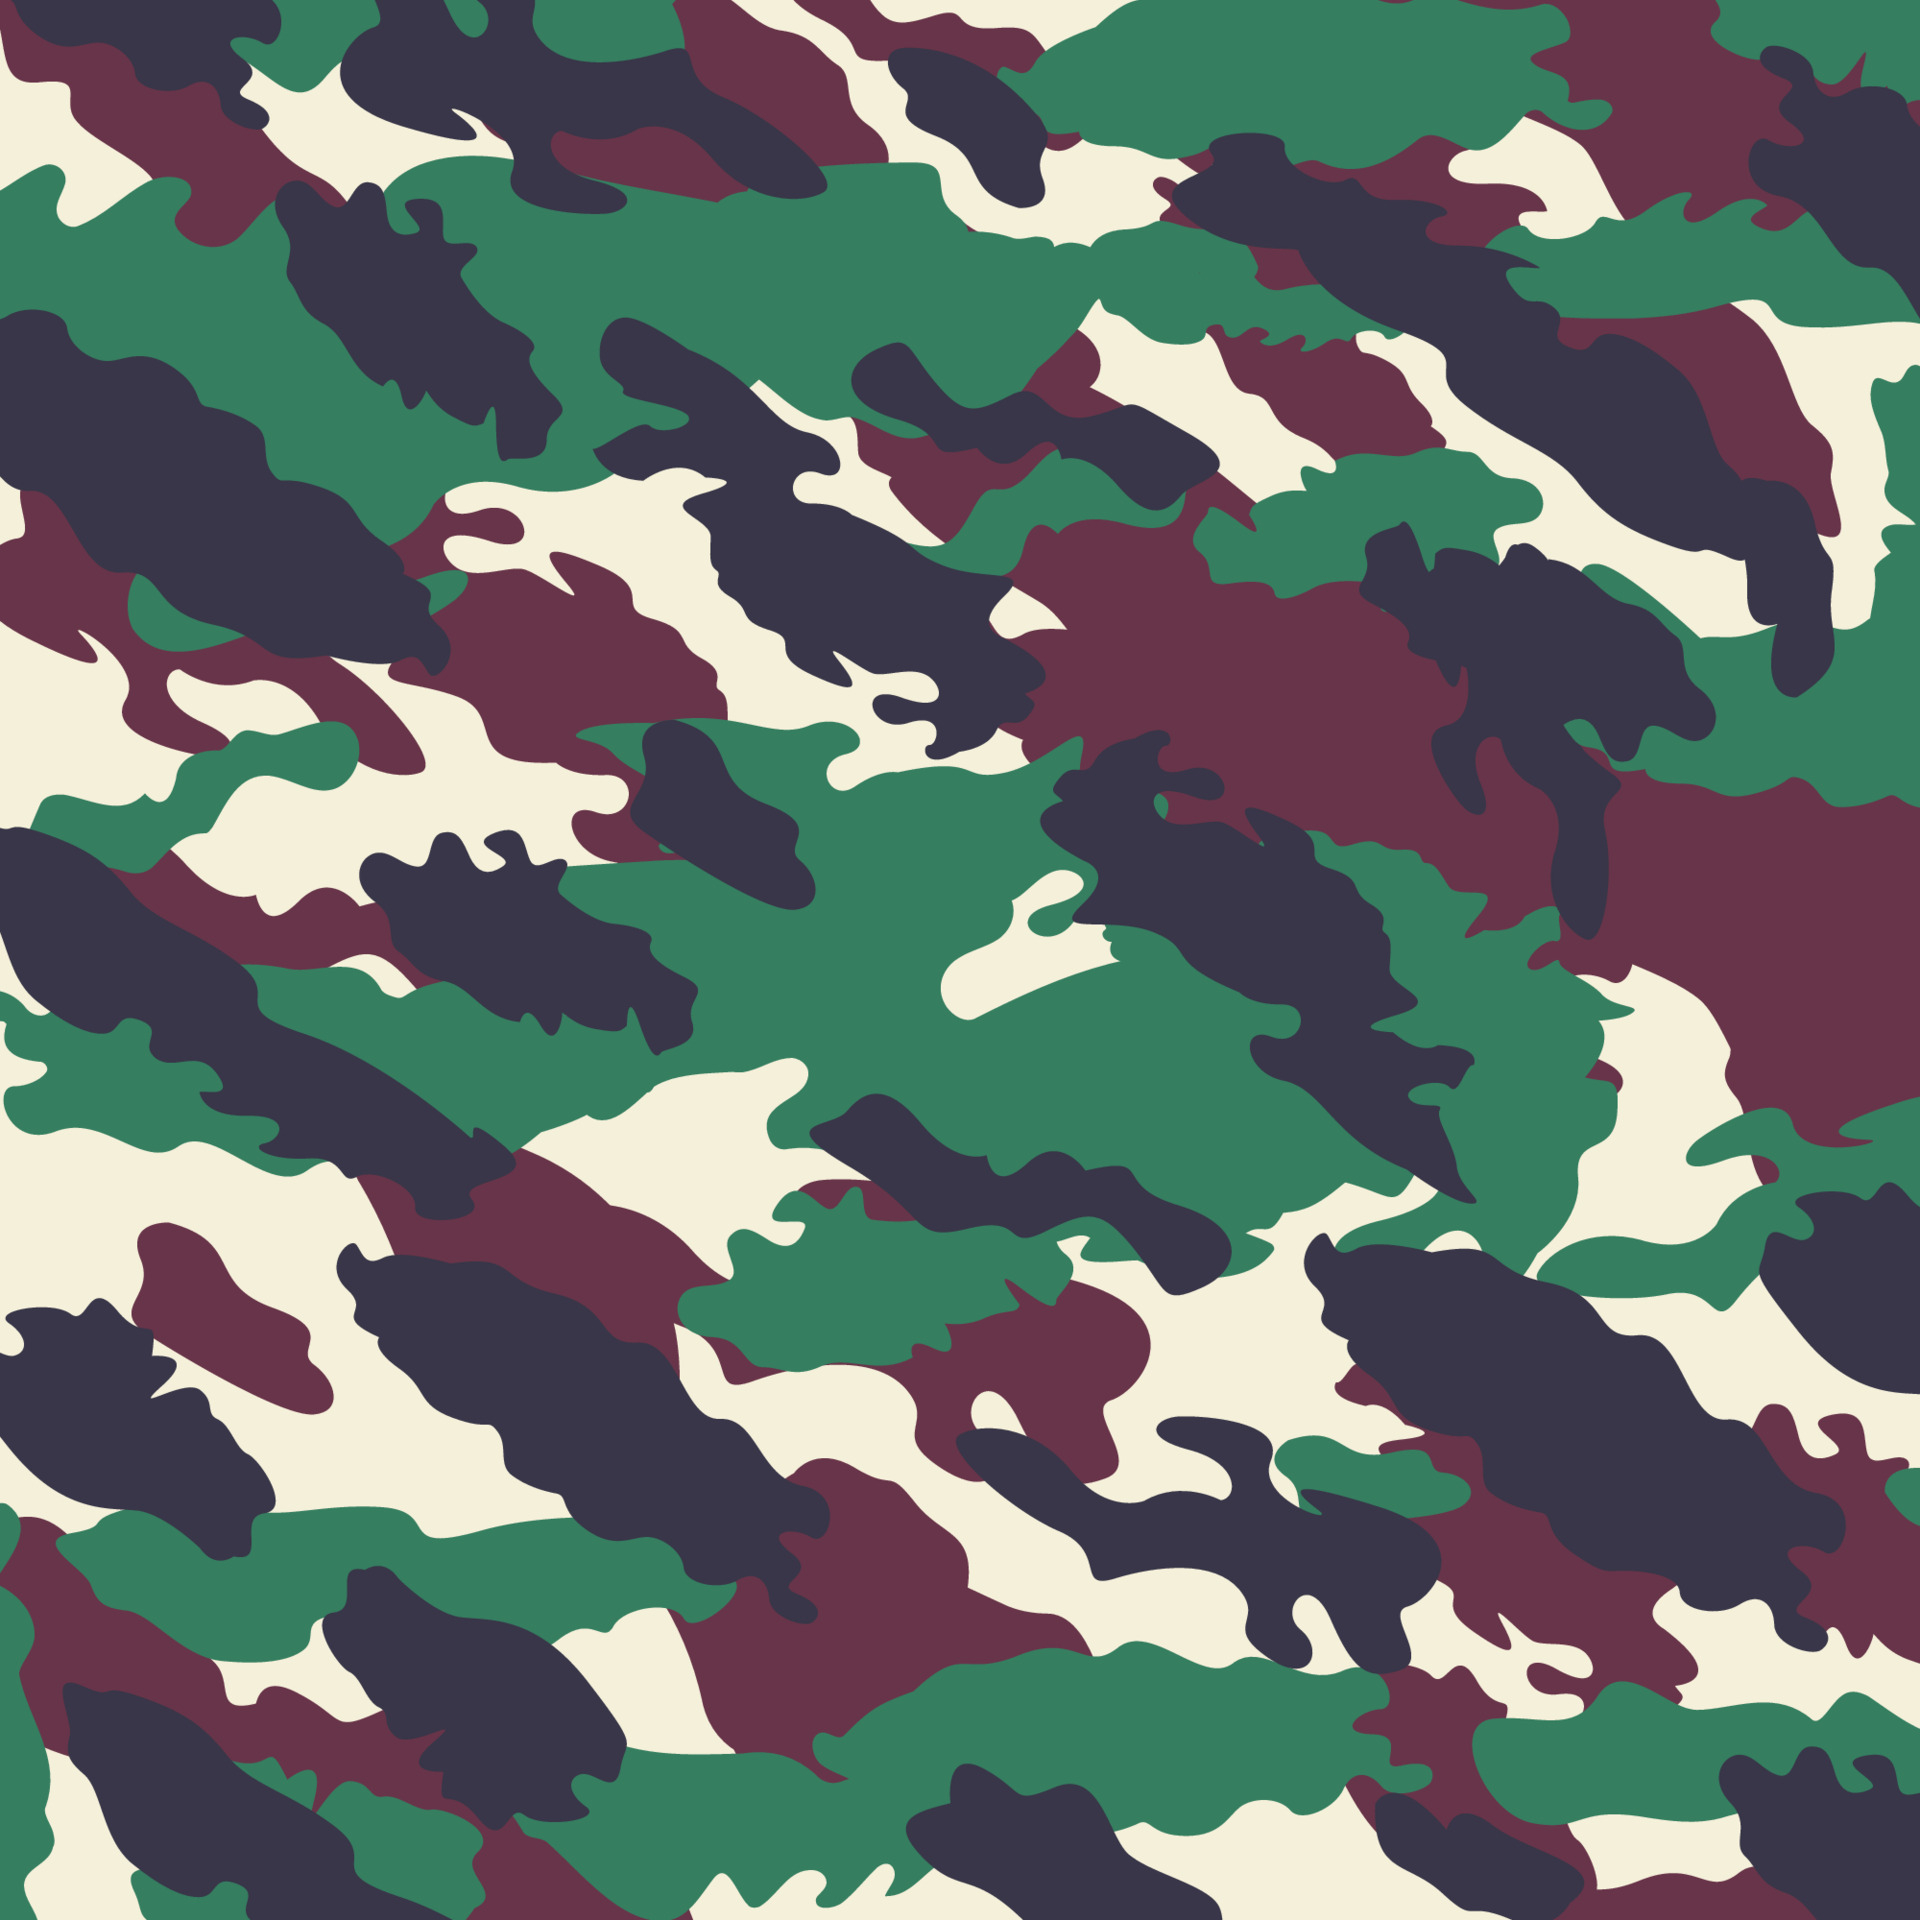 1920x1920 asia indonesia soldier camouflage stripe woodland jungle leaves pattern military background suitable for print cloth and packaging 4848515 Vector Art